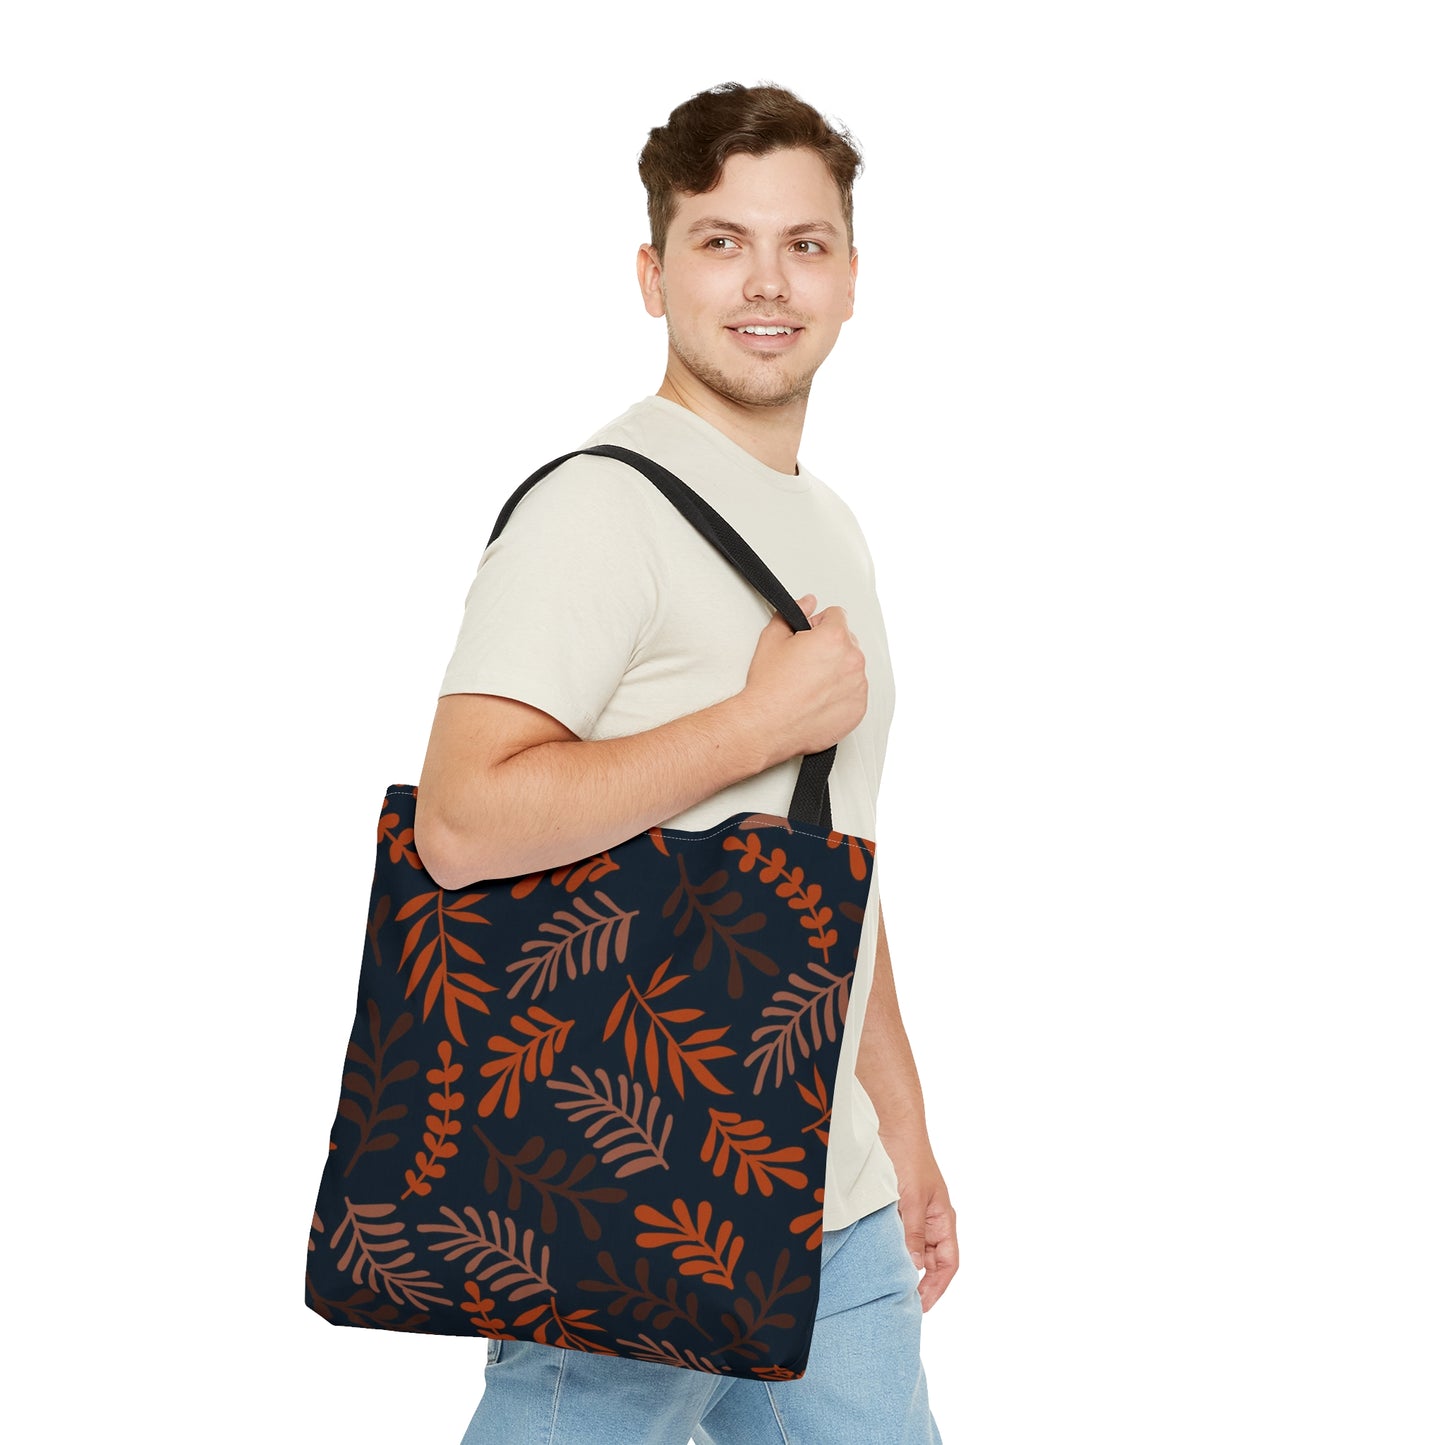 Shades of Autumn Floral Tote Bag